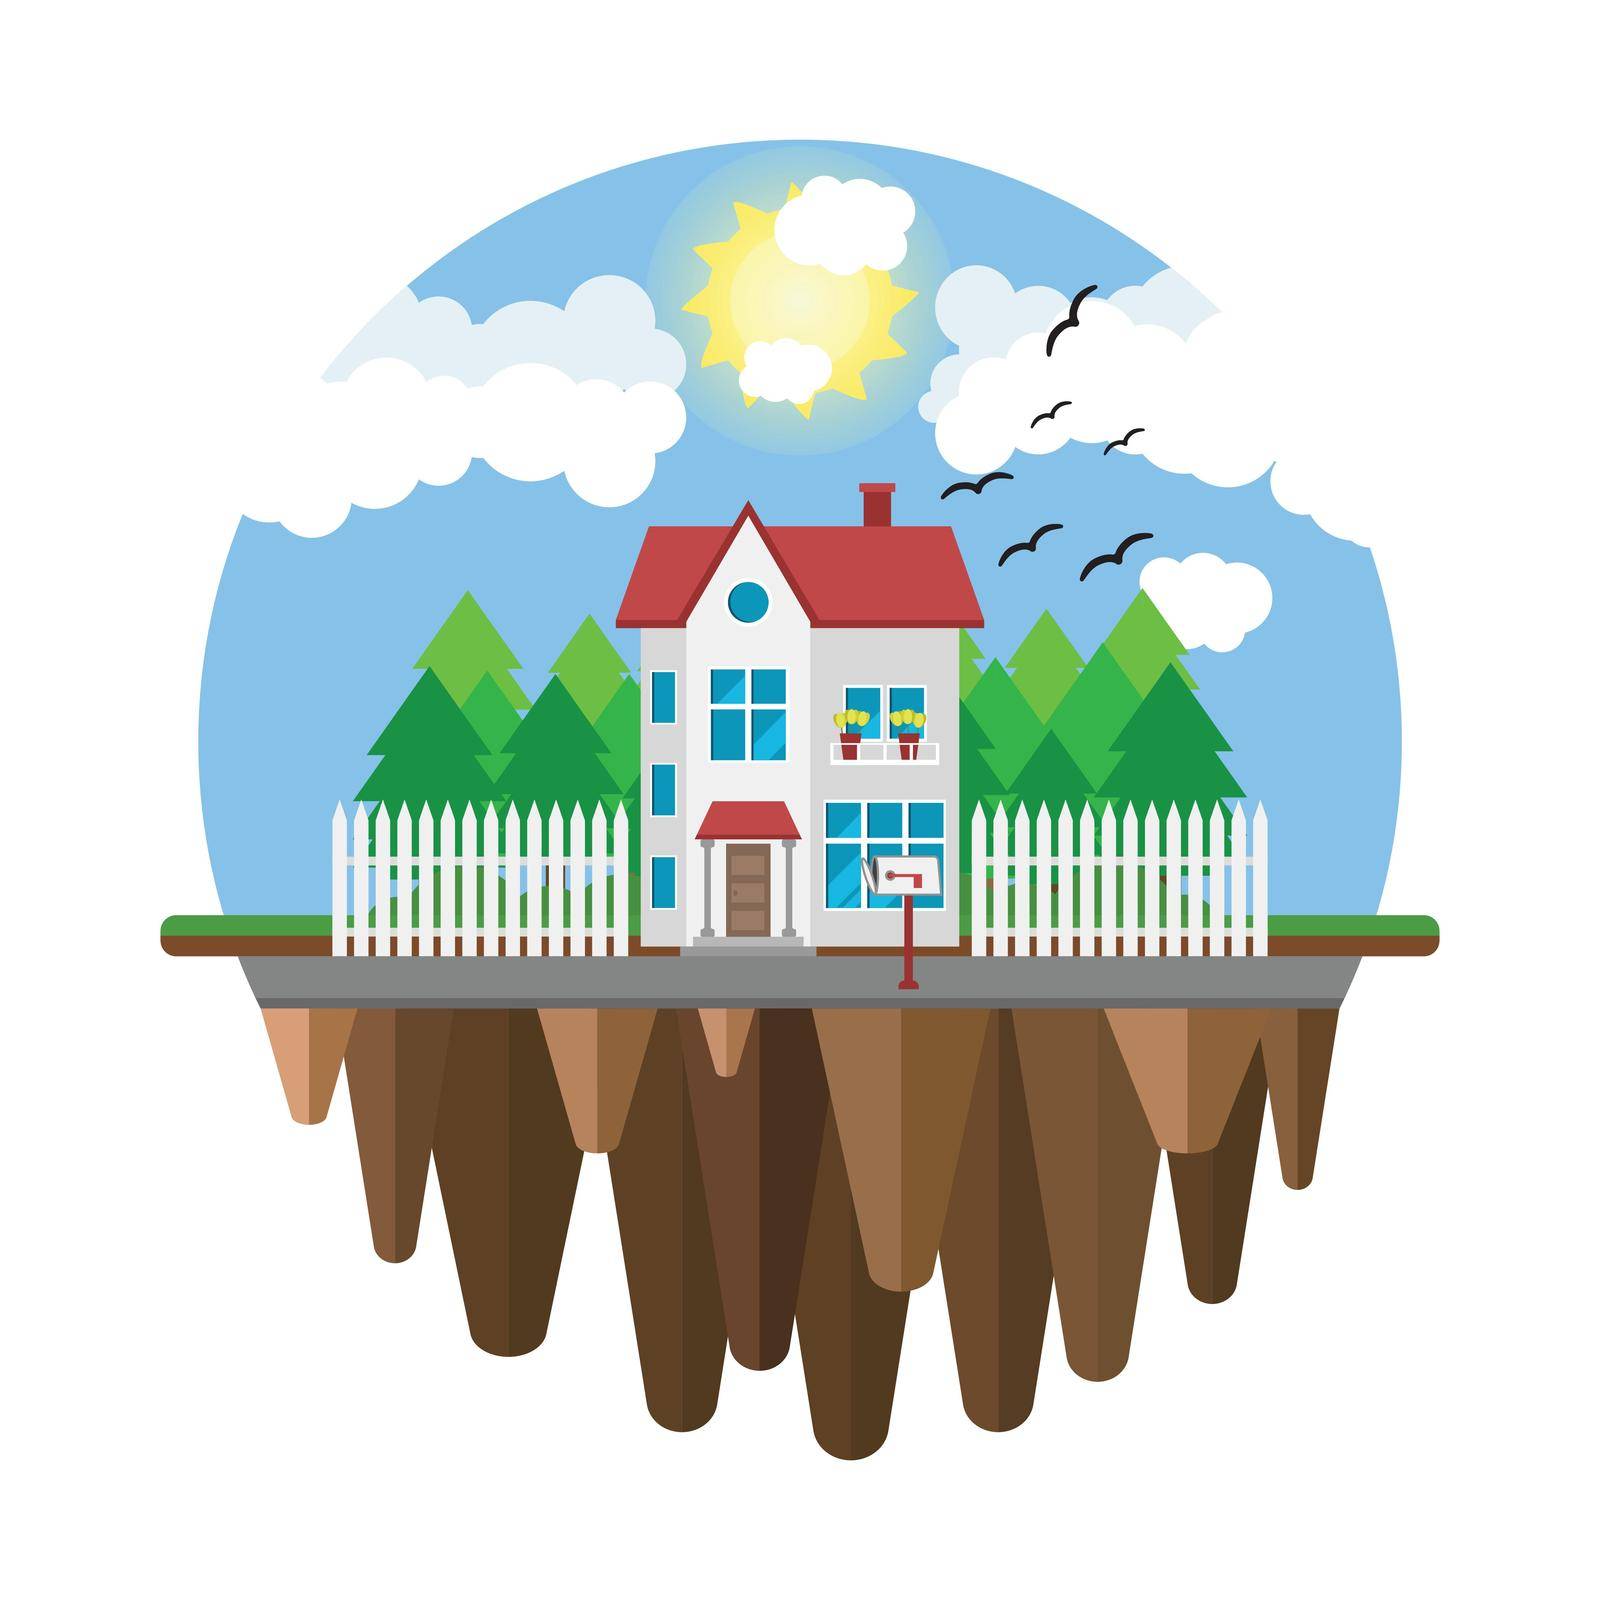 Floating house, flying home. Part of the rural and urban landscape. Vector illustration in flat style.